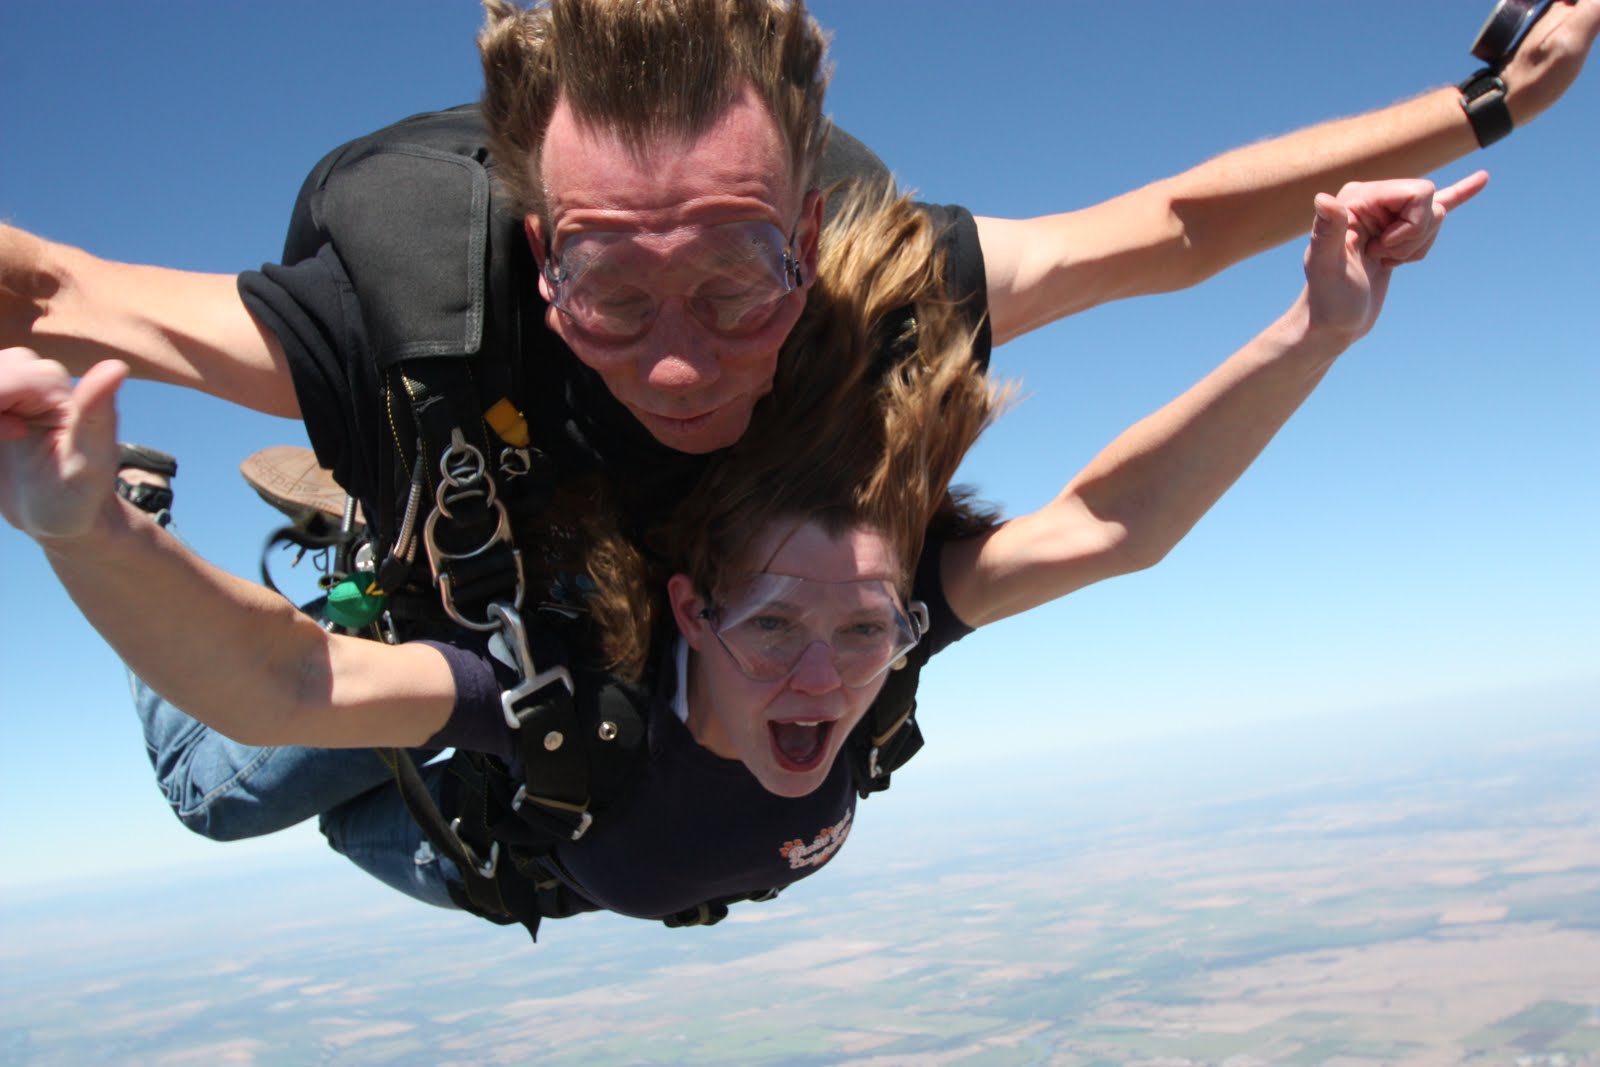 The Adventures of Helly and Lizzy "We went skydiving" you know the Tim